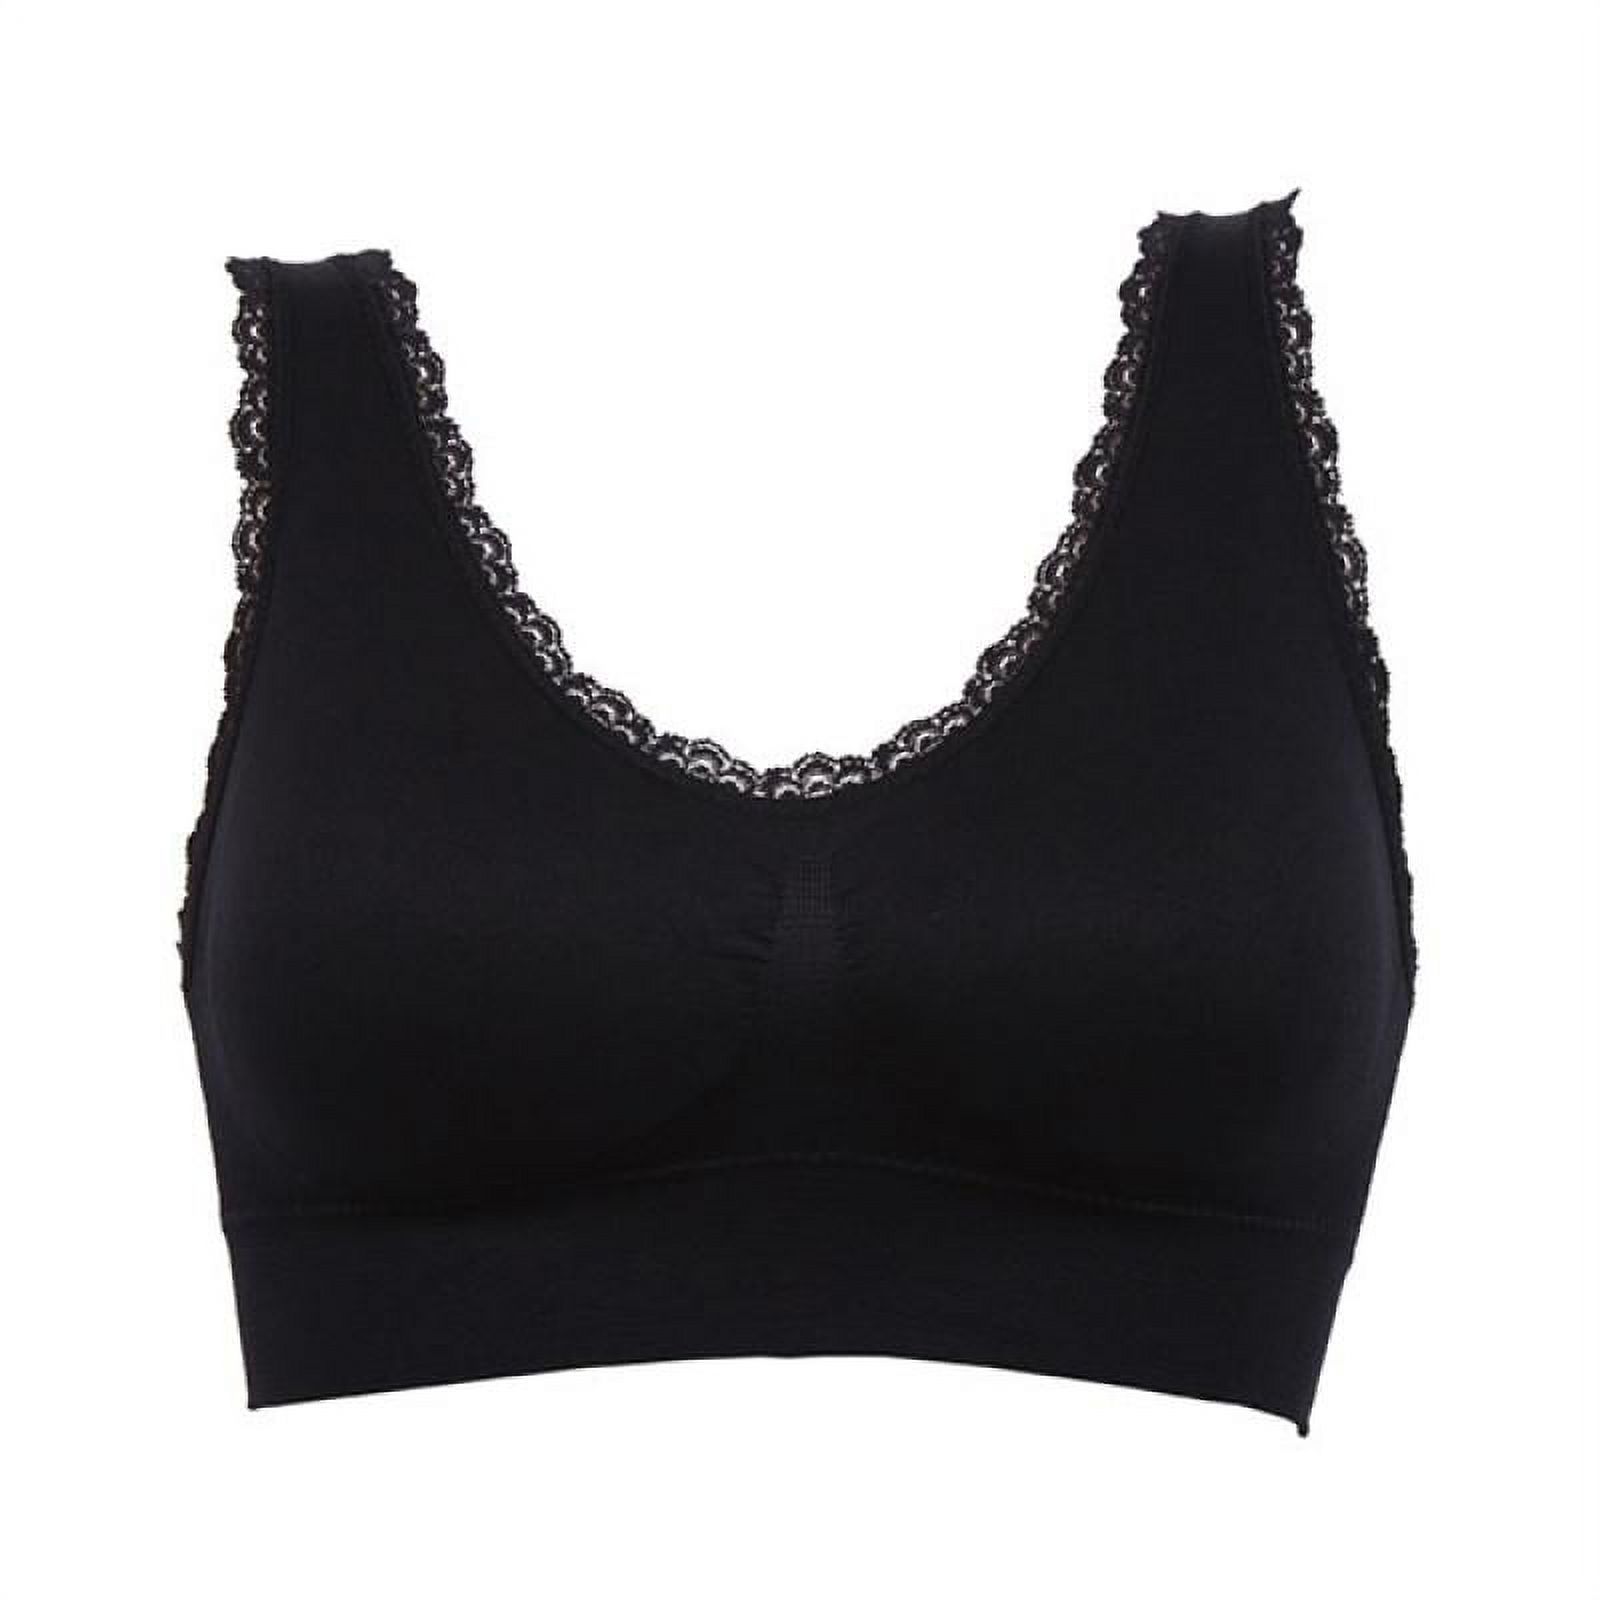 Women Sports Summer Bra Padded Bra Lace Crop Top Stretch Fitness Gym Yoga Outdoor Athletic Vest Black XL - image 1 of 11